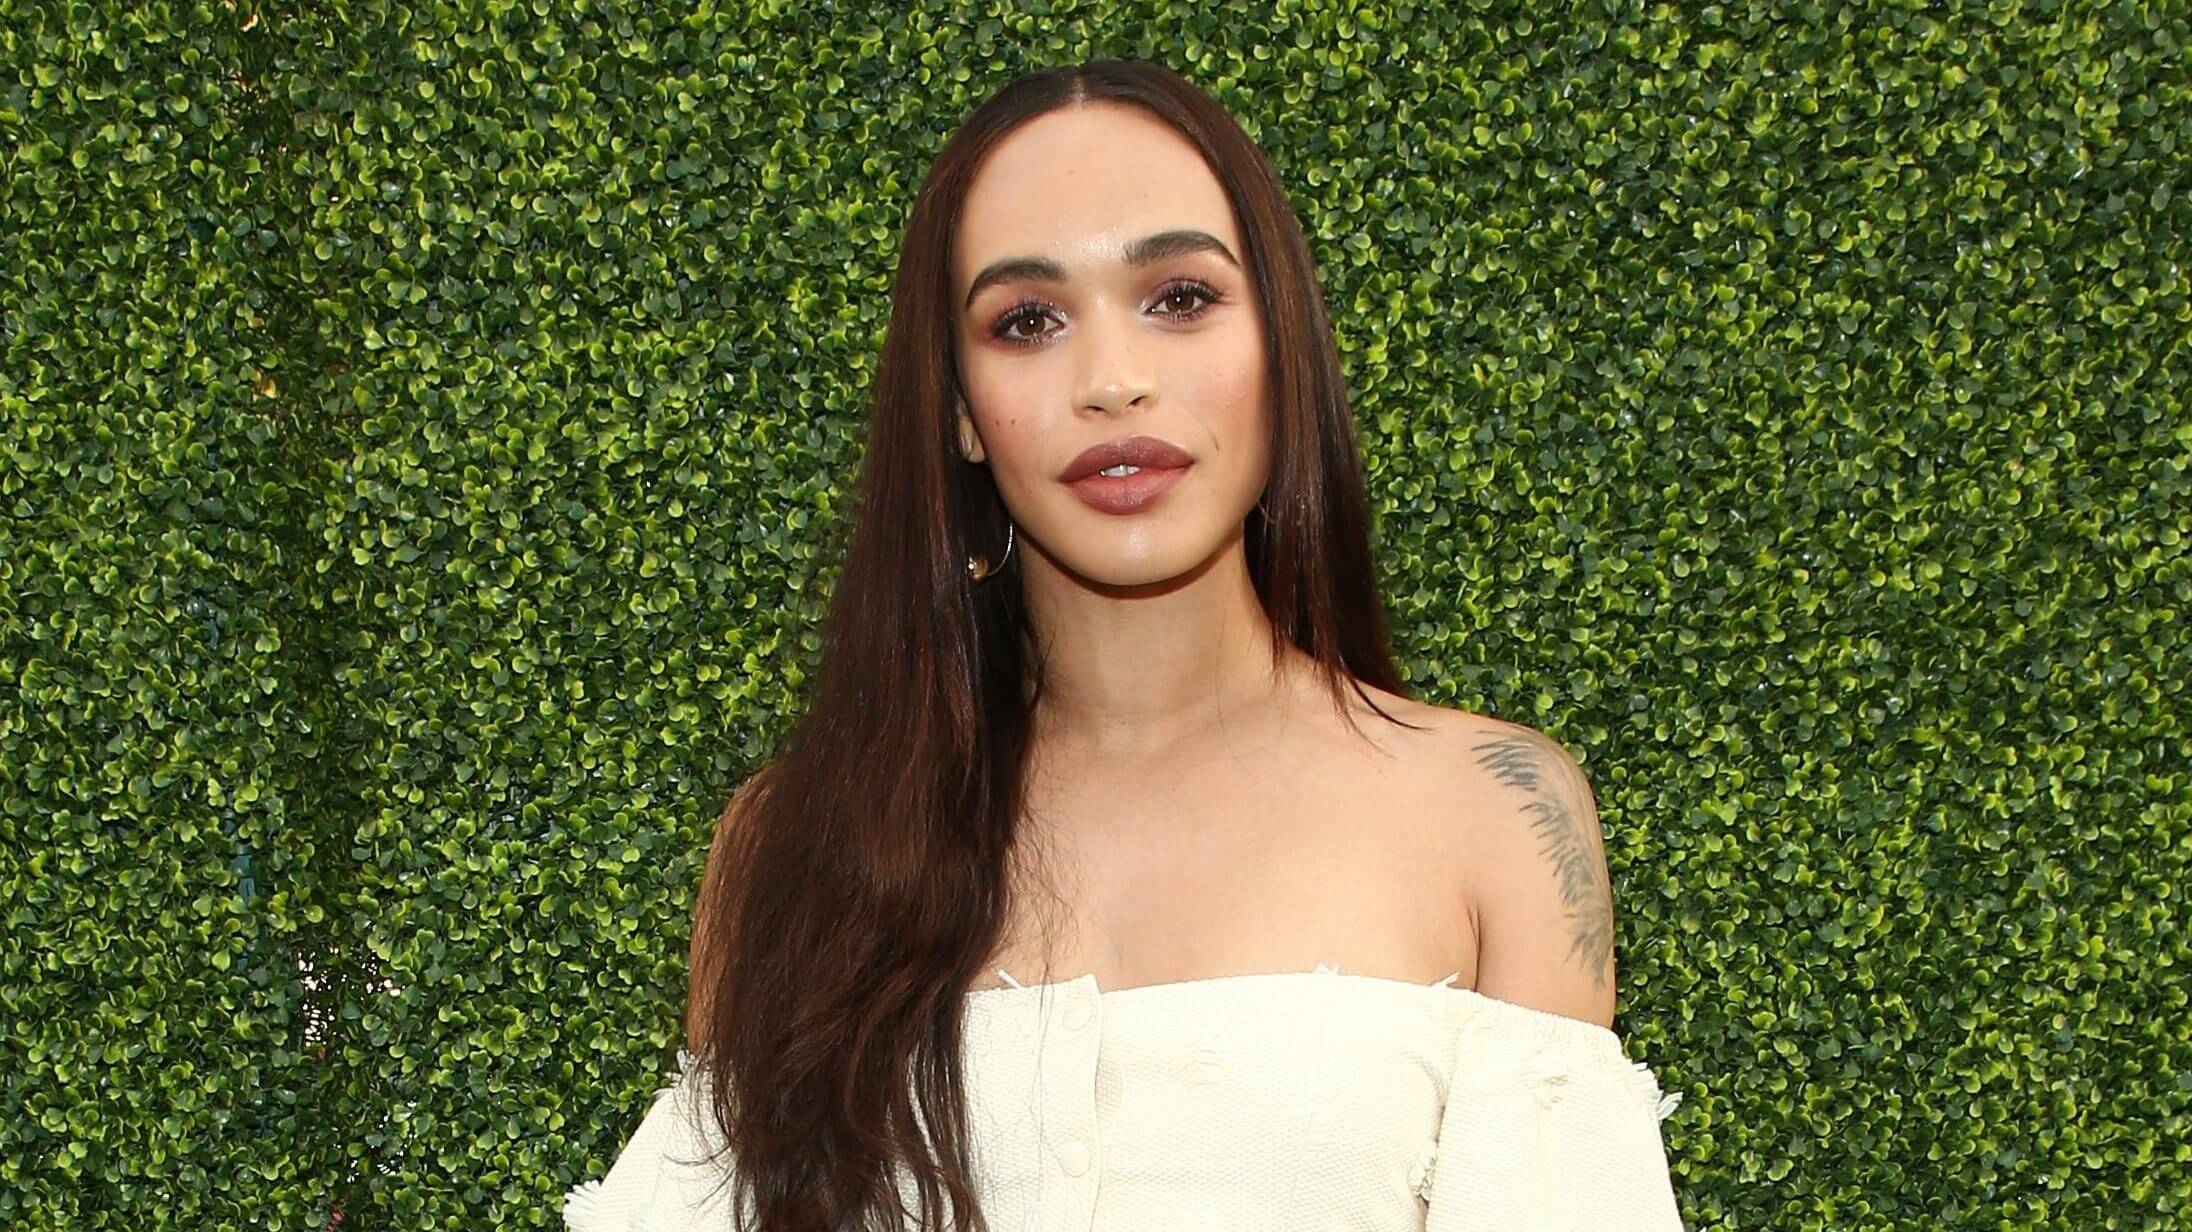 Hulu Series ‘Dopesick’ Adds Cleopatra Coleman to Its Cast